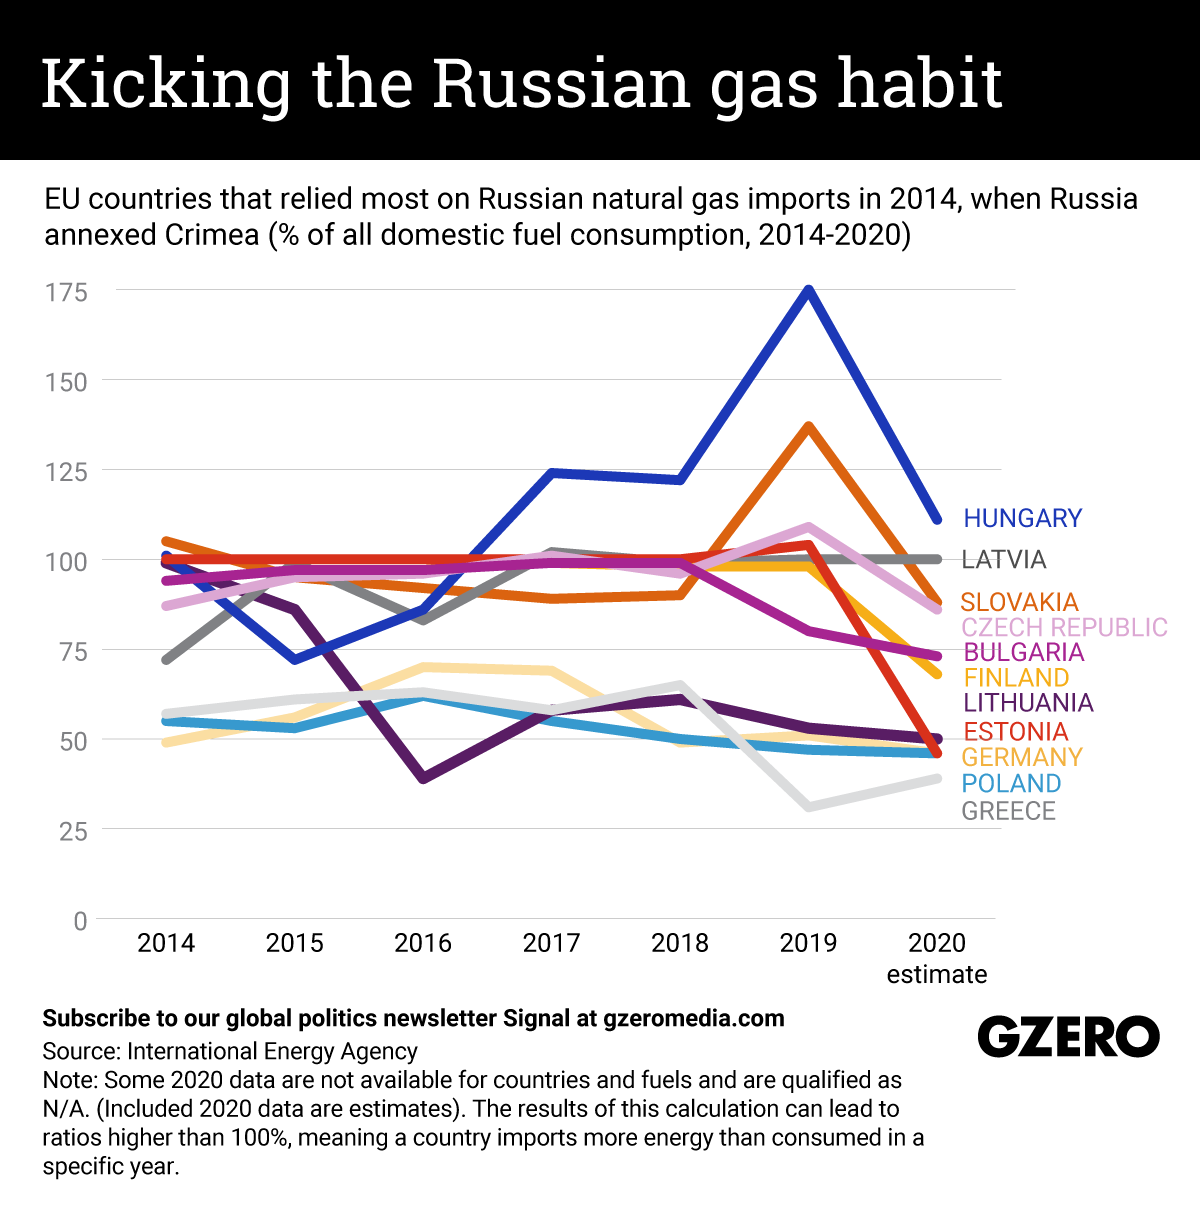 The Graphic Truth: Kicking the Russian gas habit